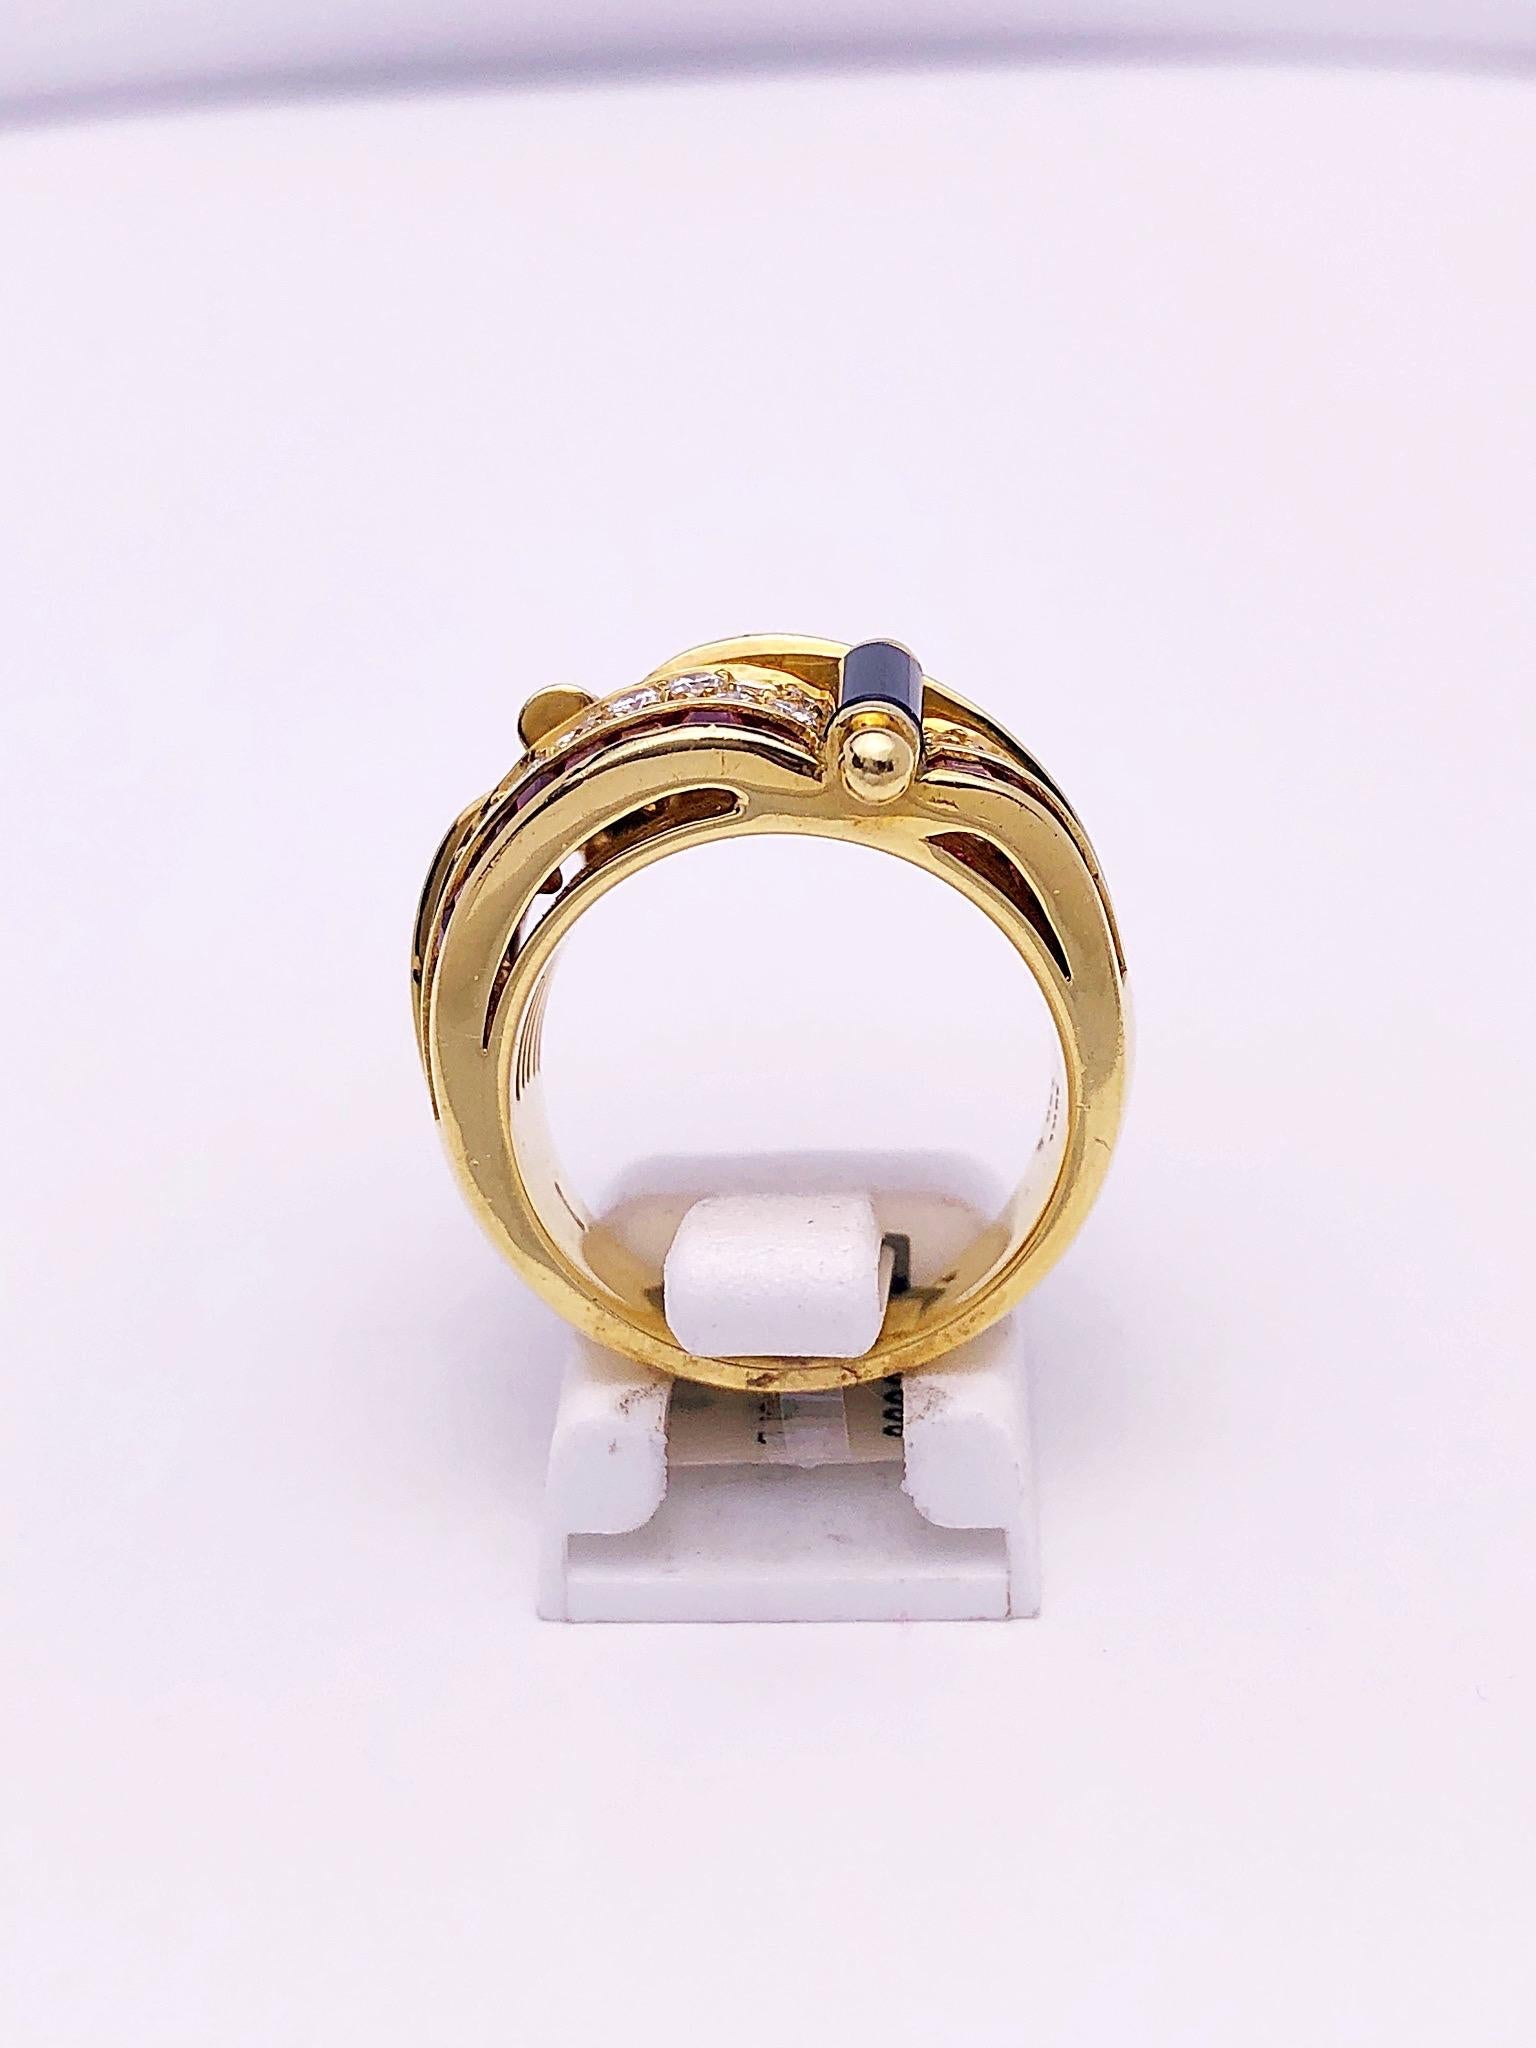 Contemporary Picchiotti 18 Karat Yellow Gold Ring with Diamond, Ruby, and Black Onyx For Sale